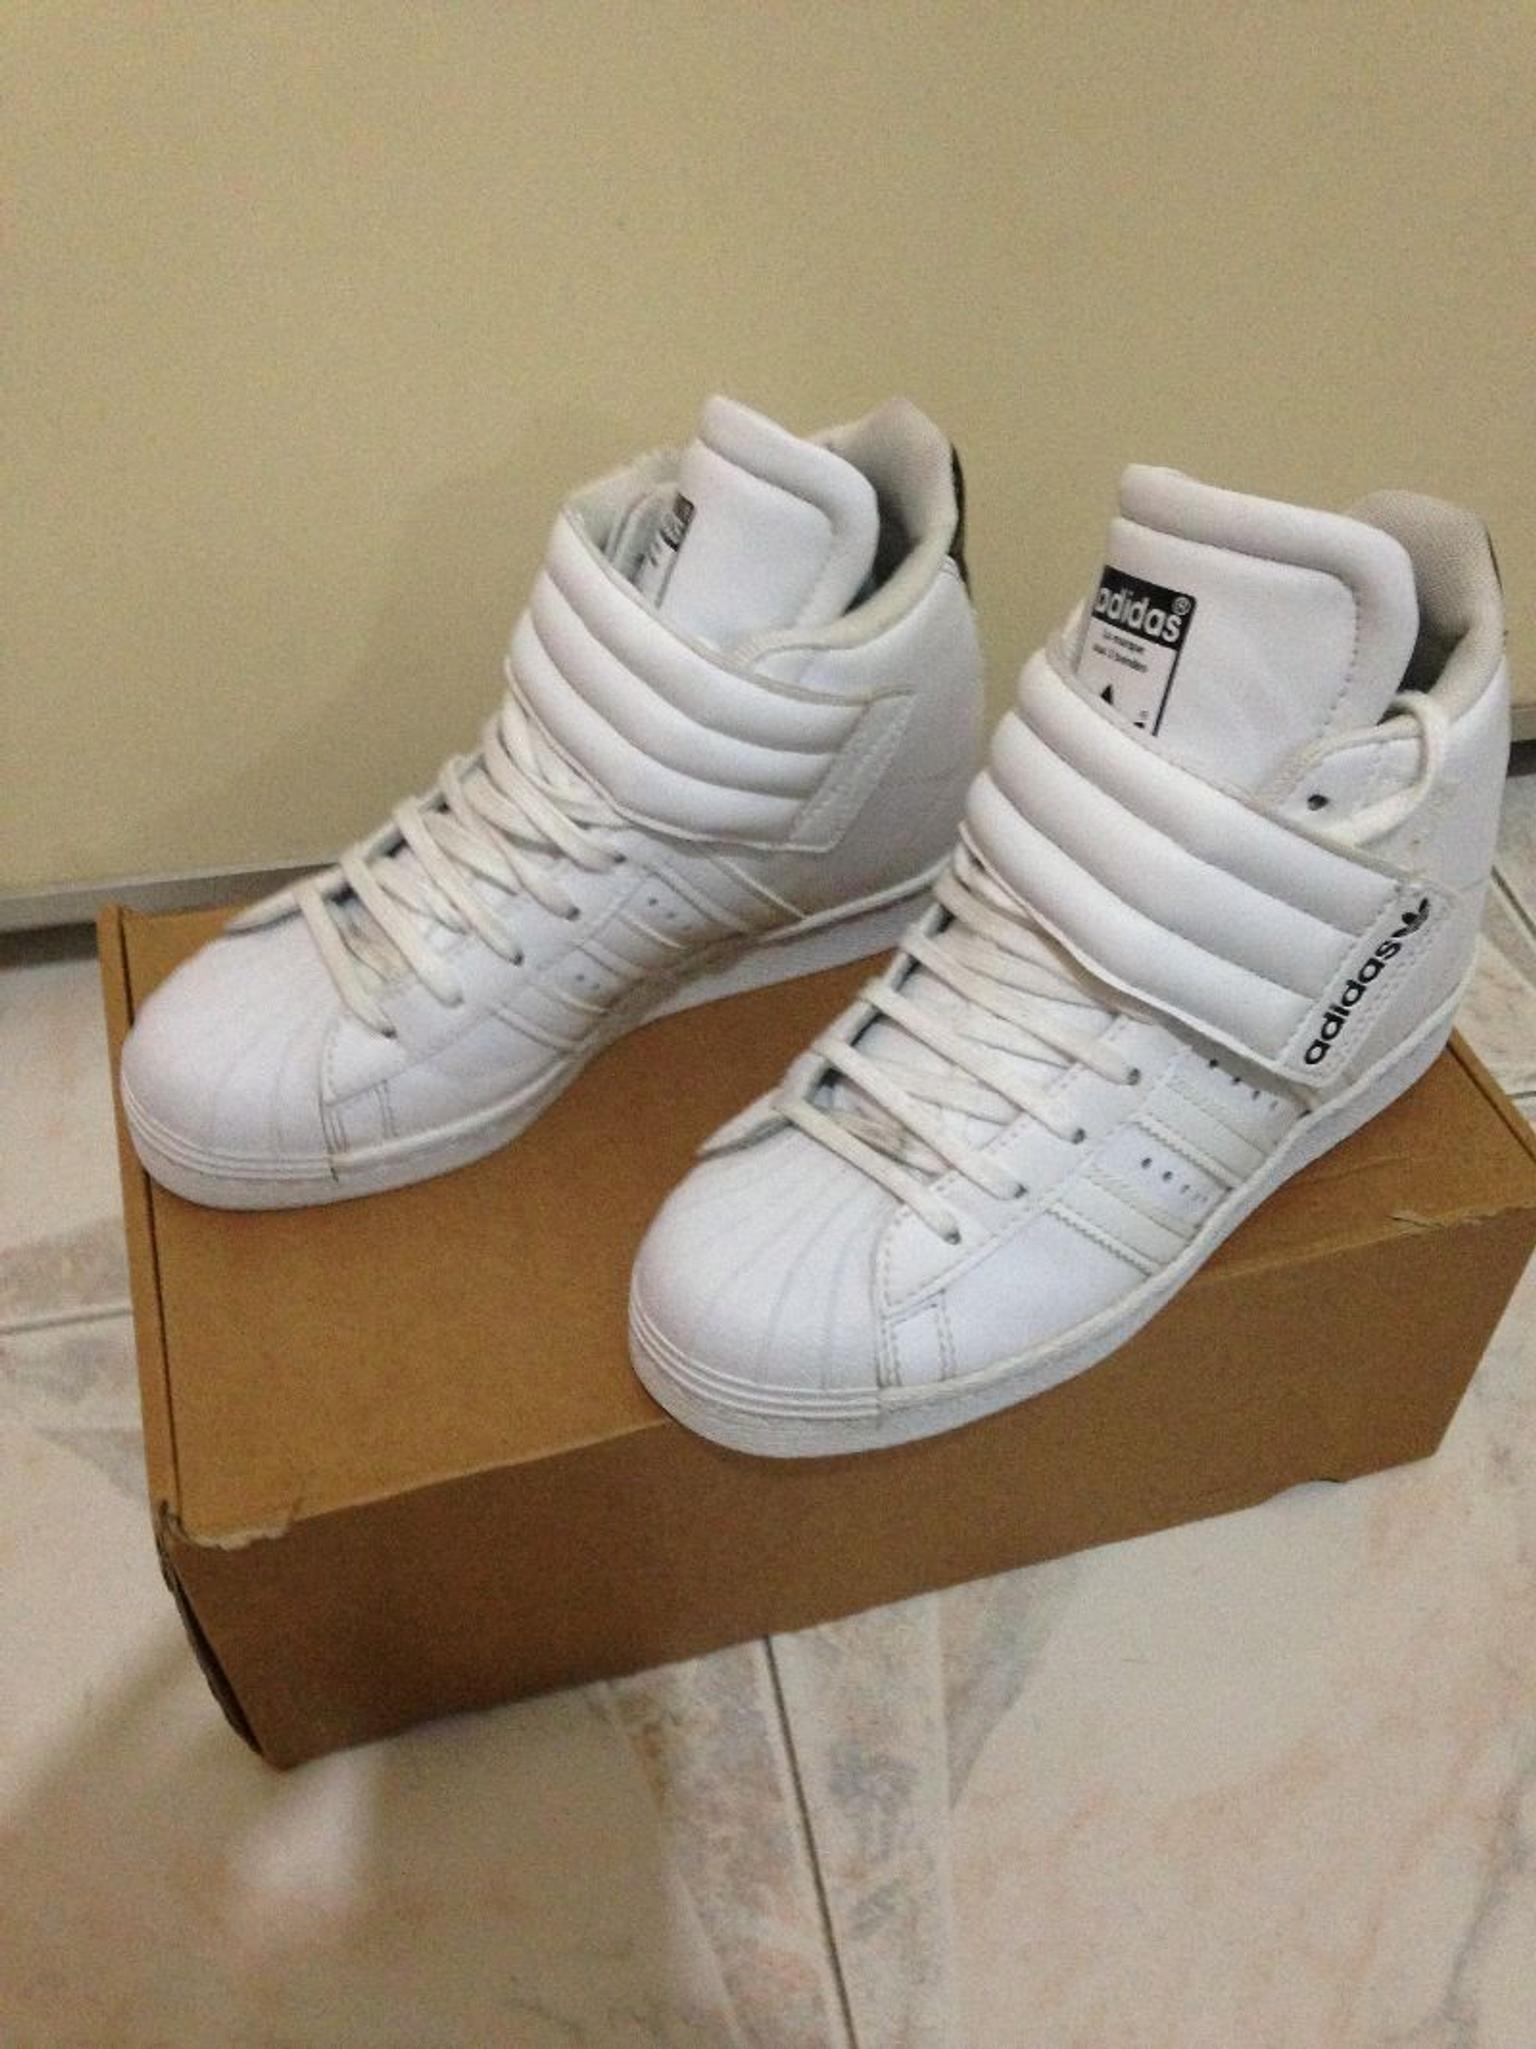 SNEAKERS ADIDAS SUPERSTAR 36.2/3 in 80034 Marigliano for €60.00 for sale |  Shpock